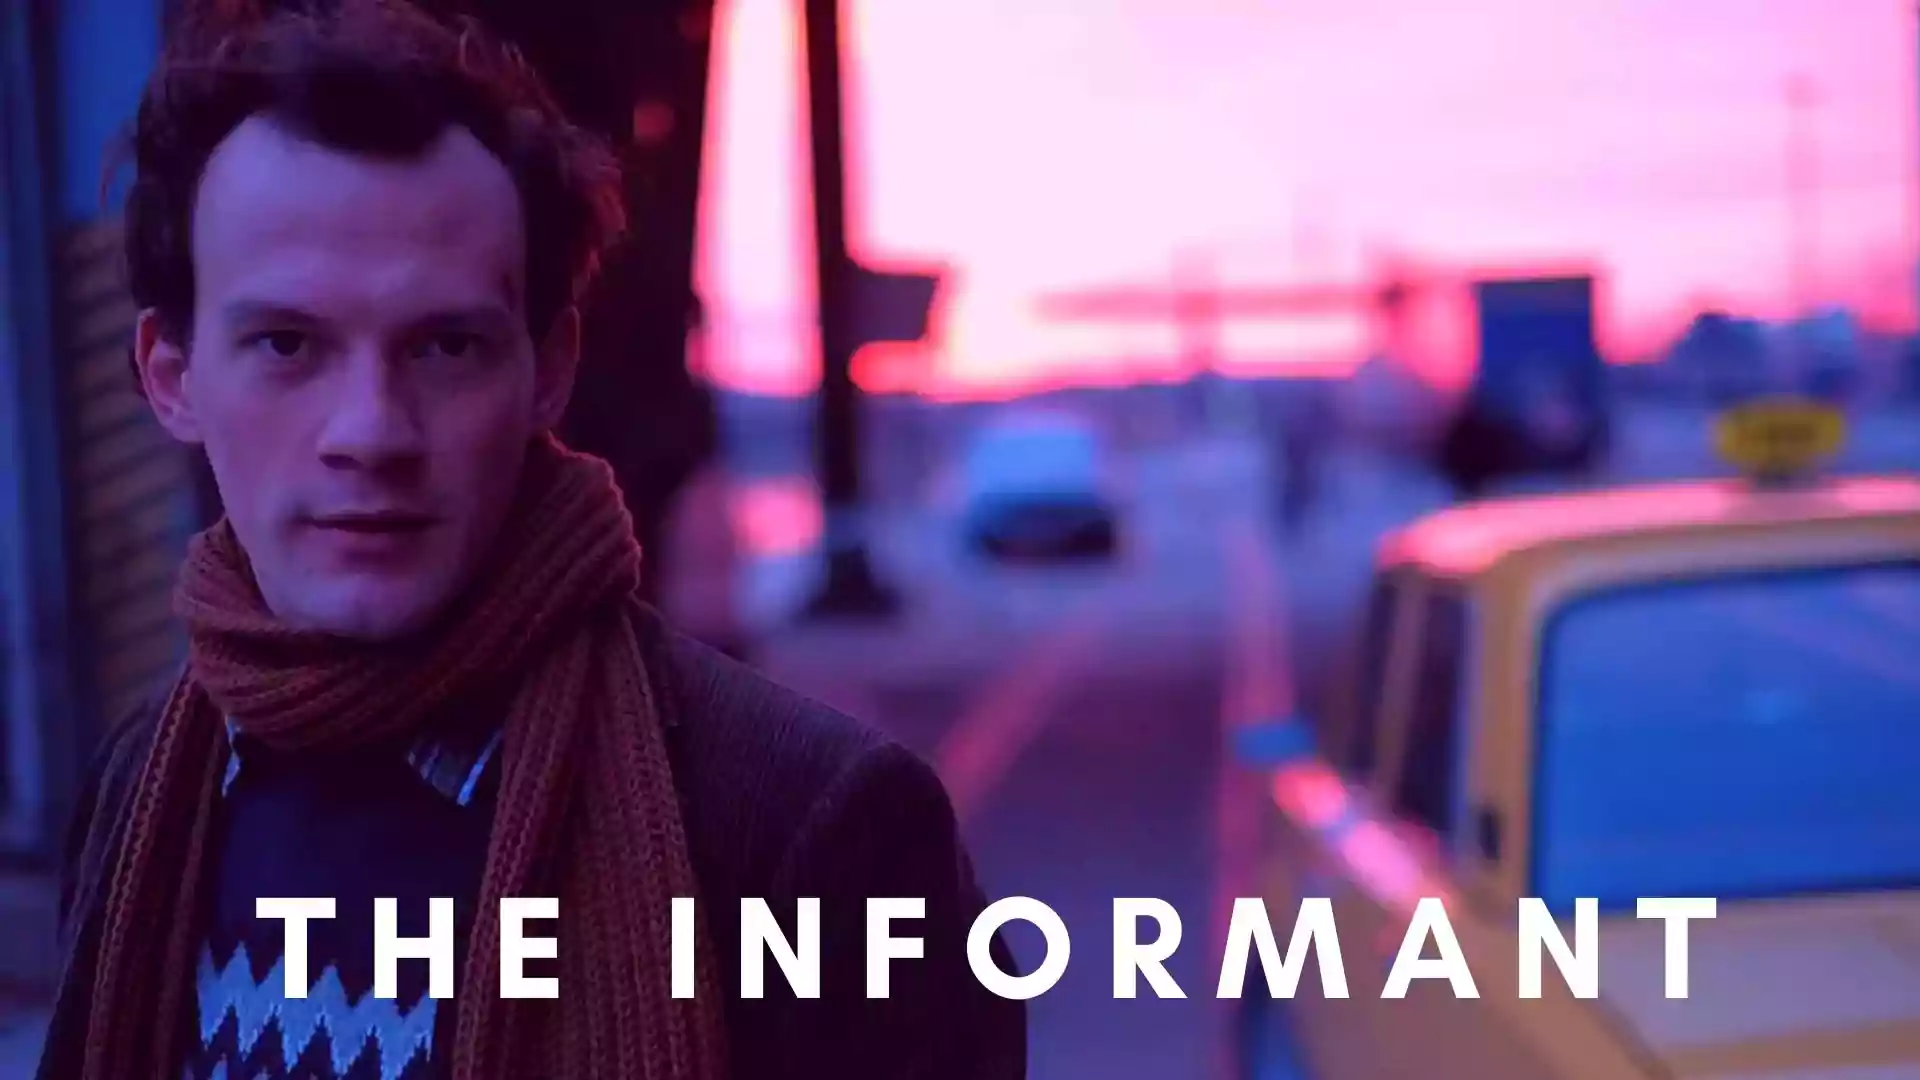 The Informant Wallpaper and Image